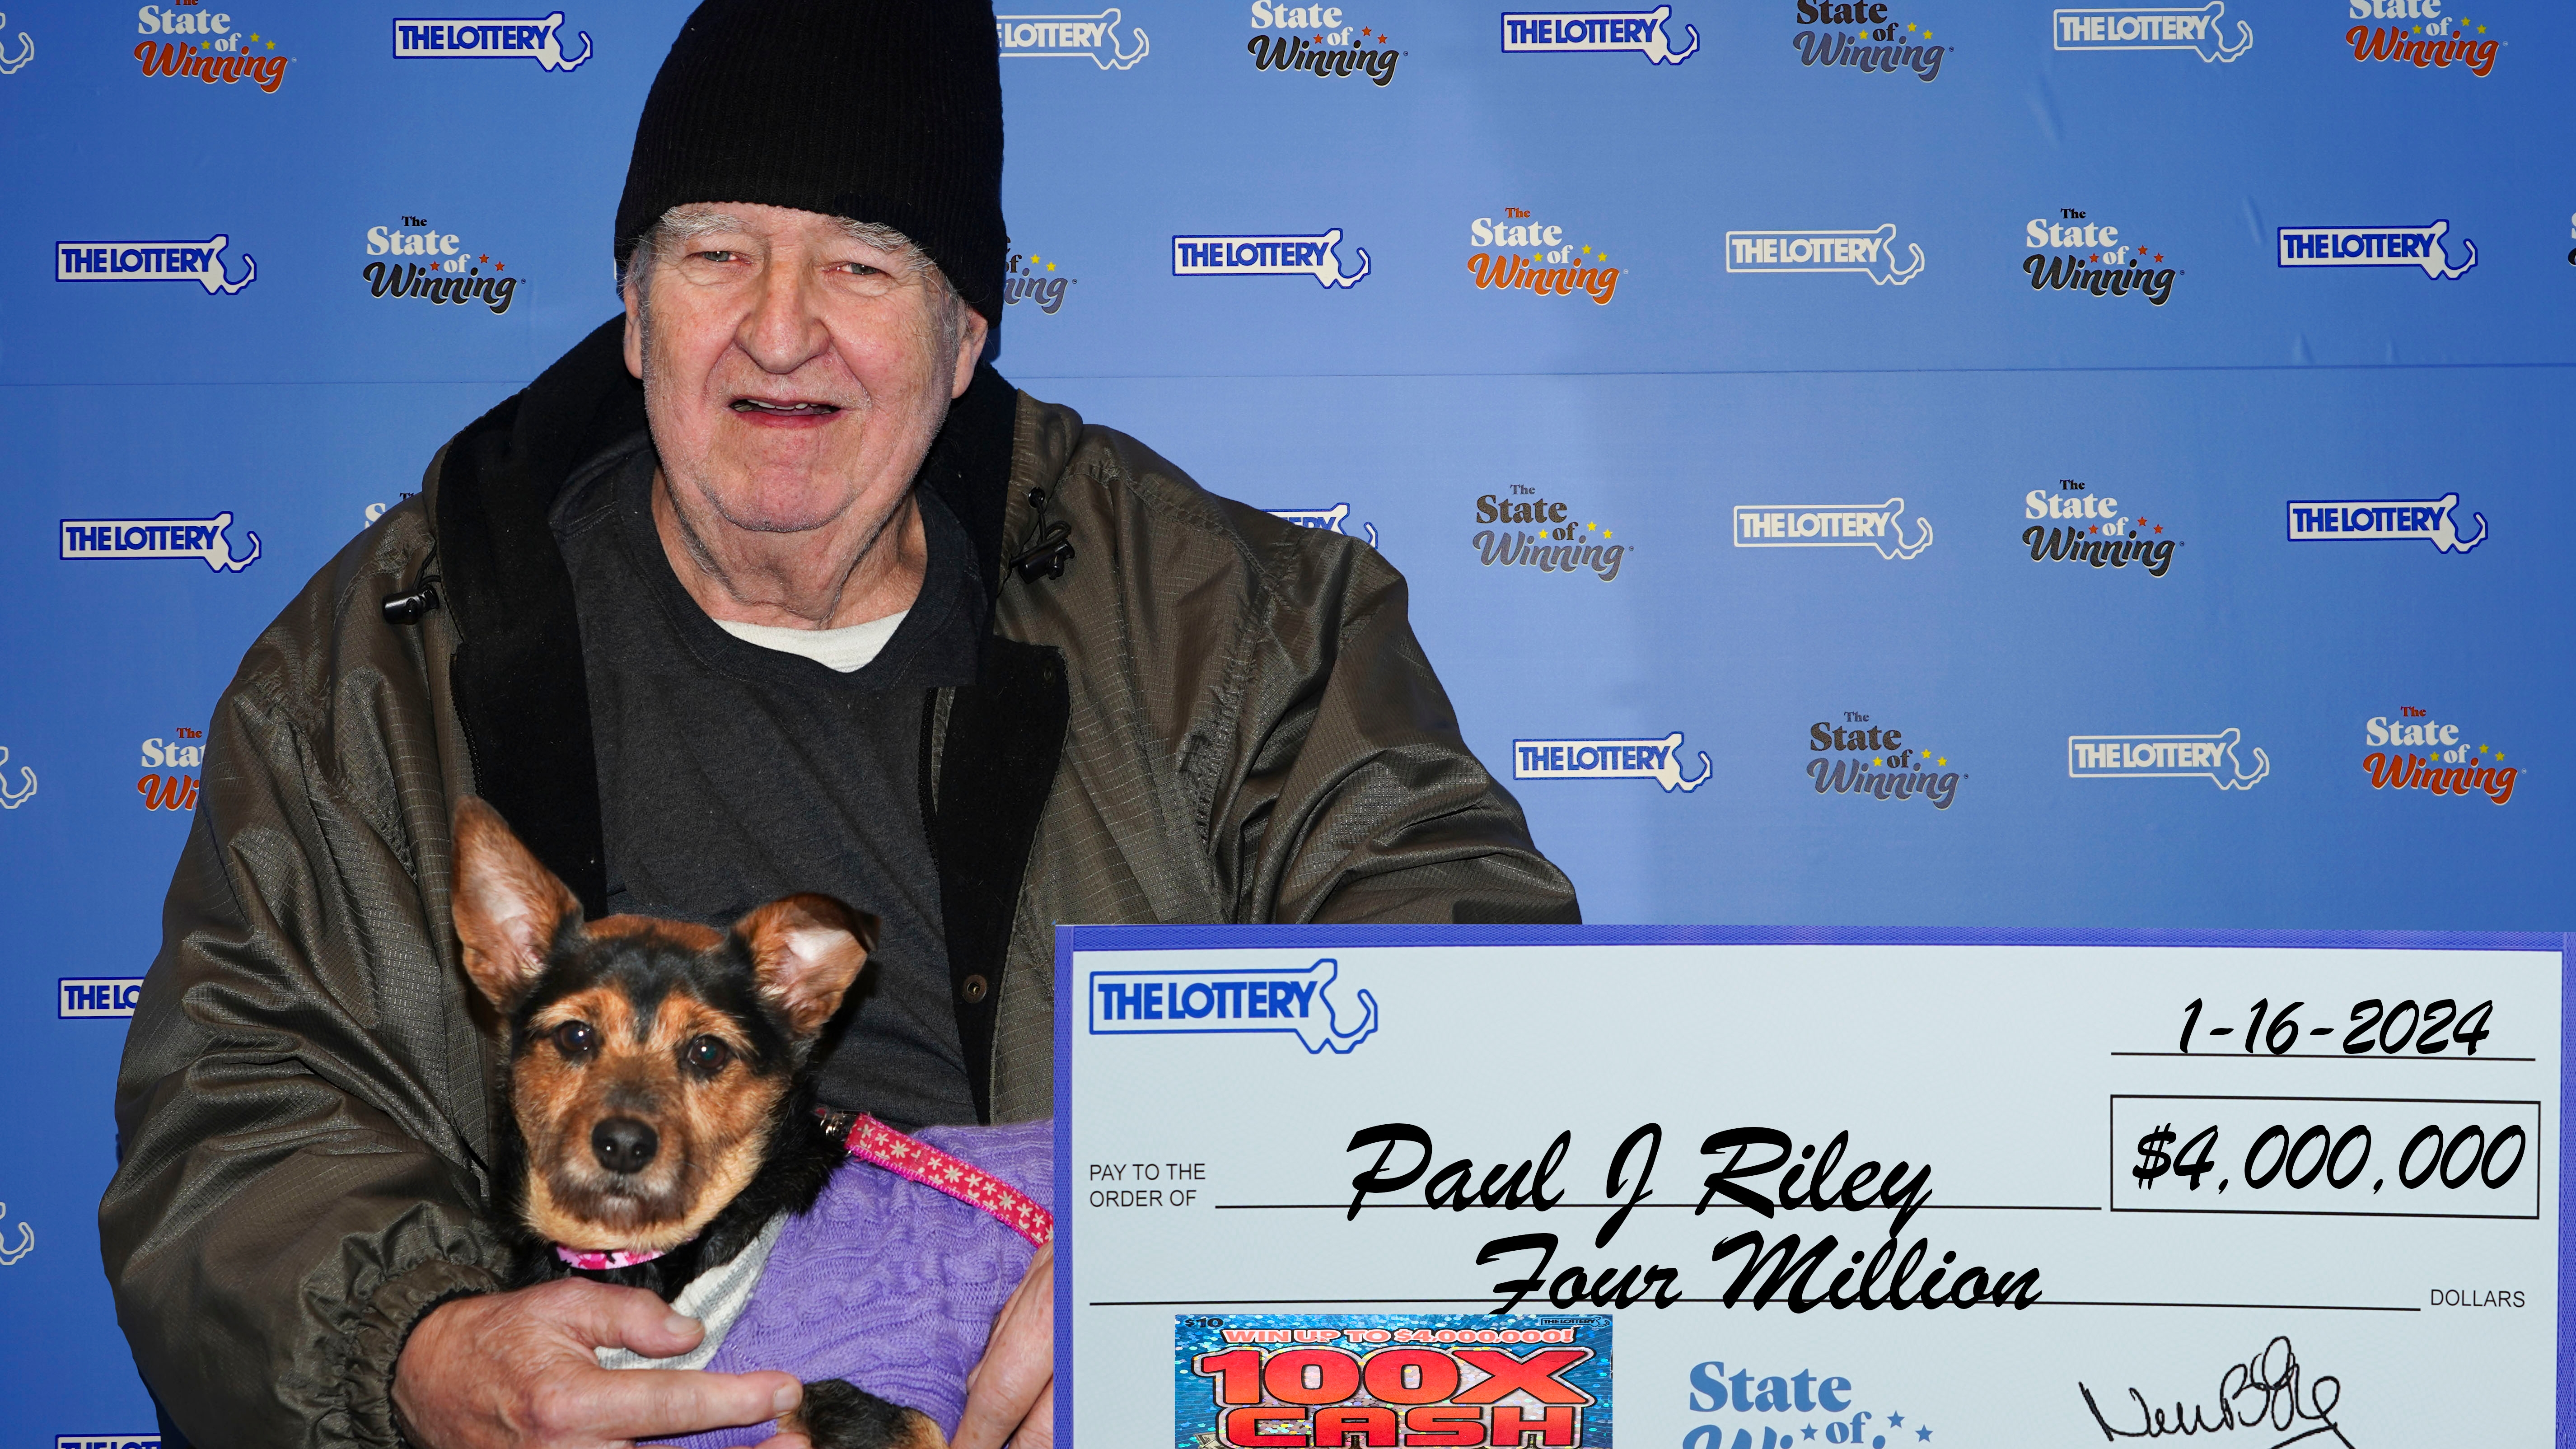 Man claims $4 million lottery prize with dog, plans donation for animal  welfare